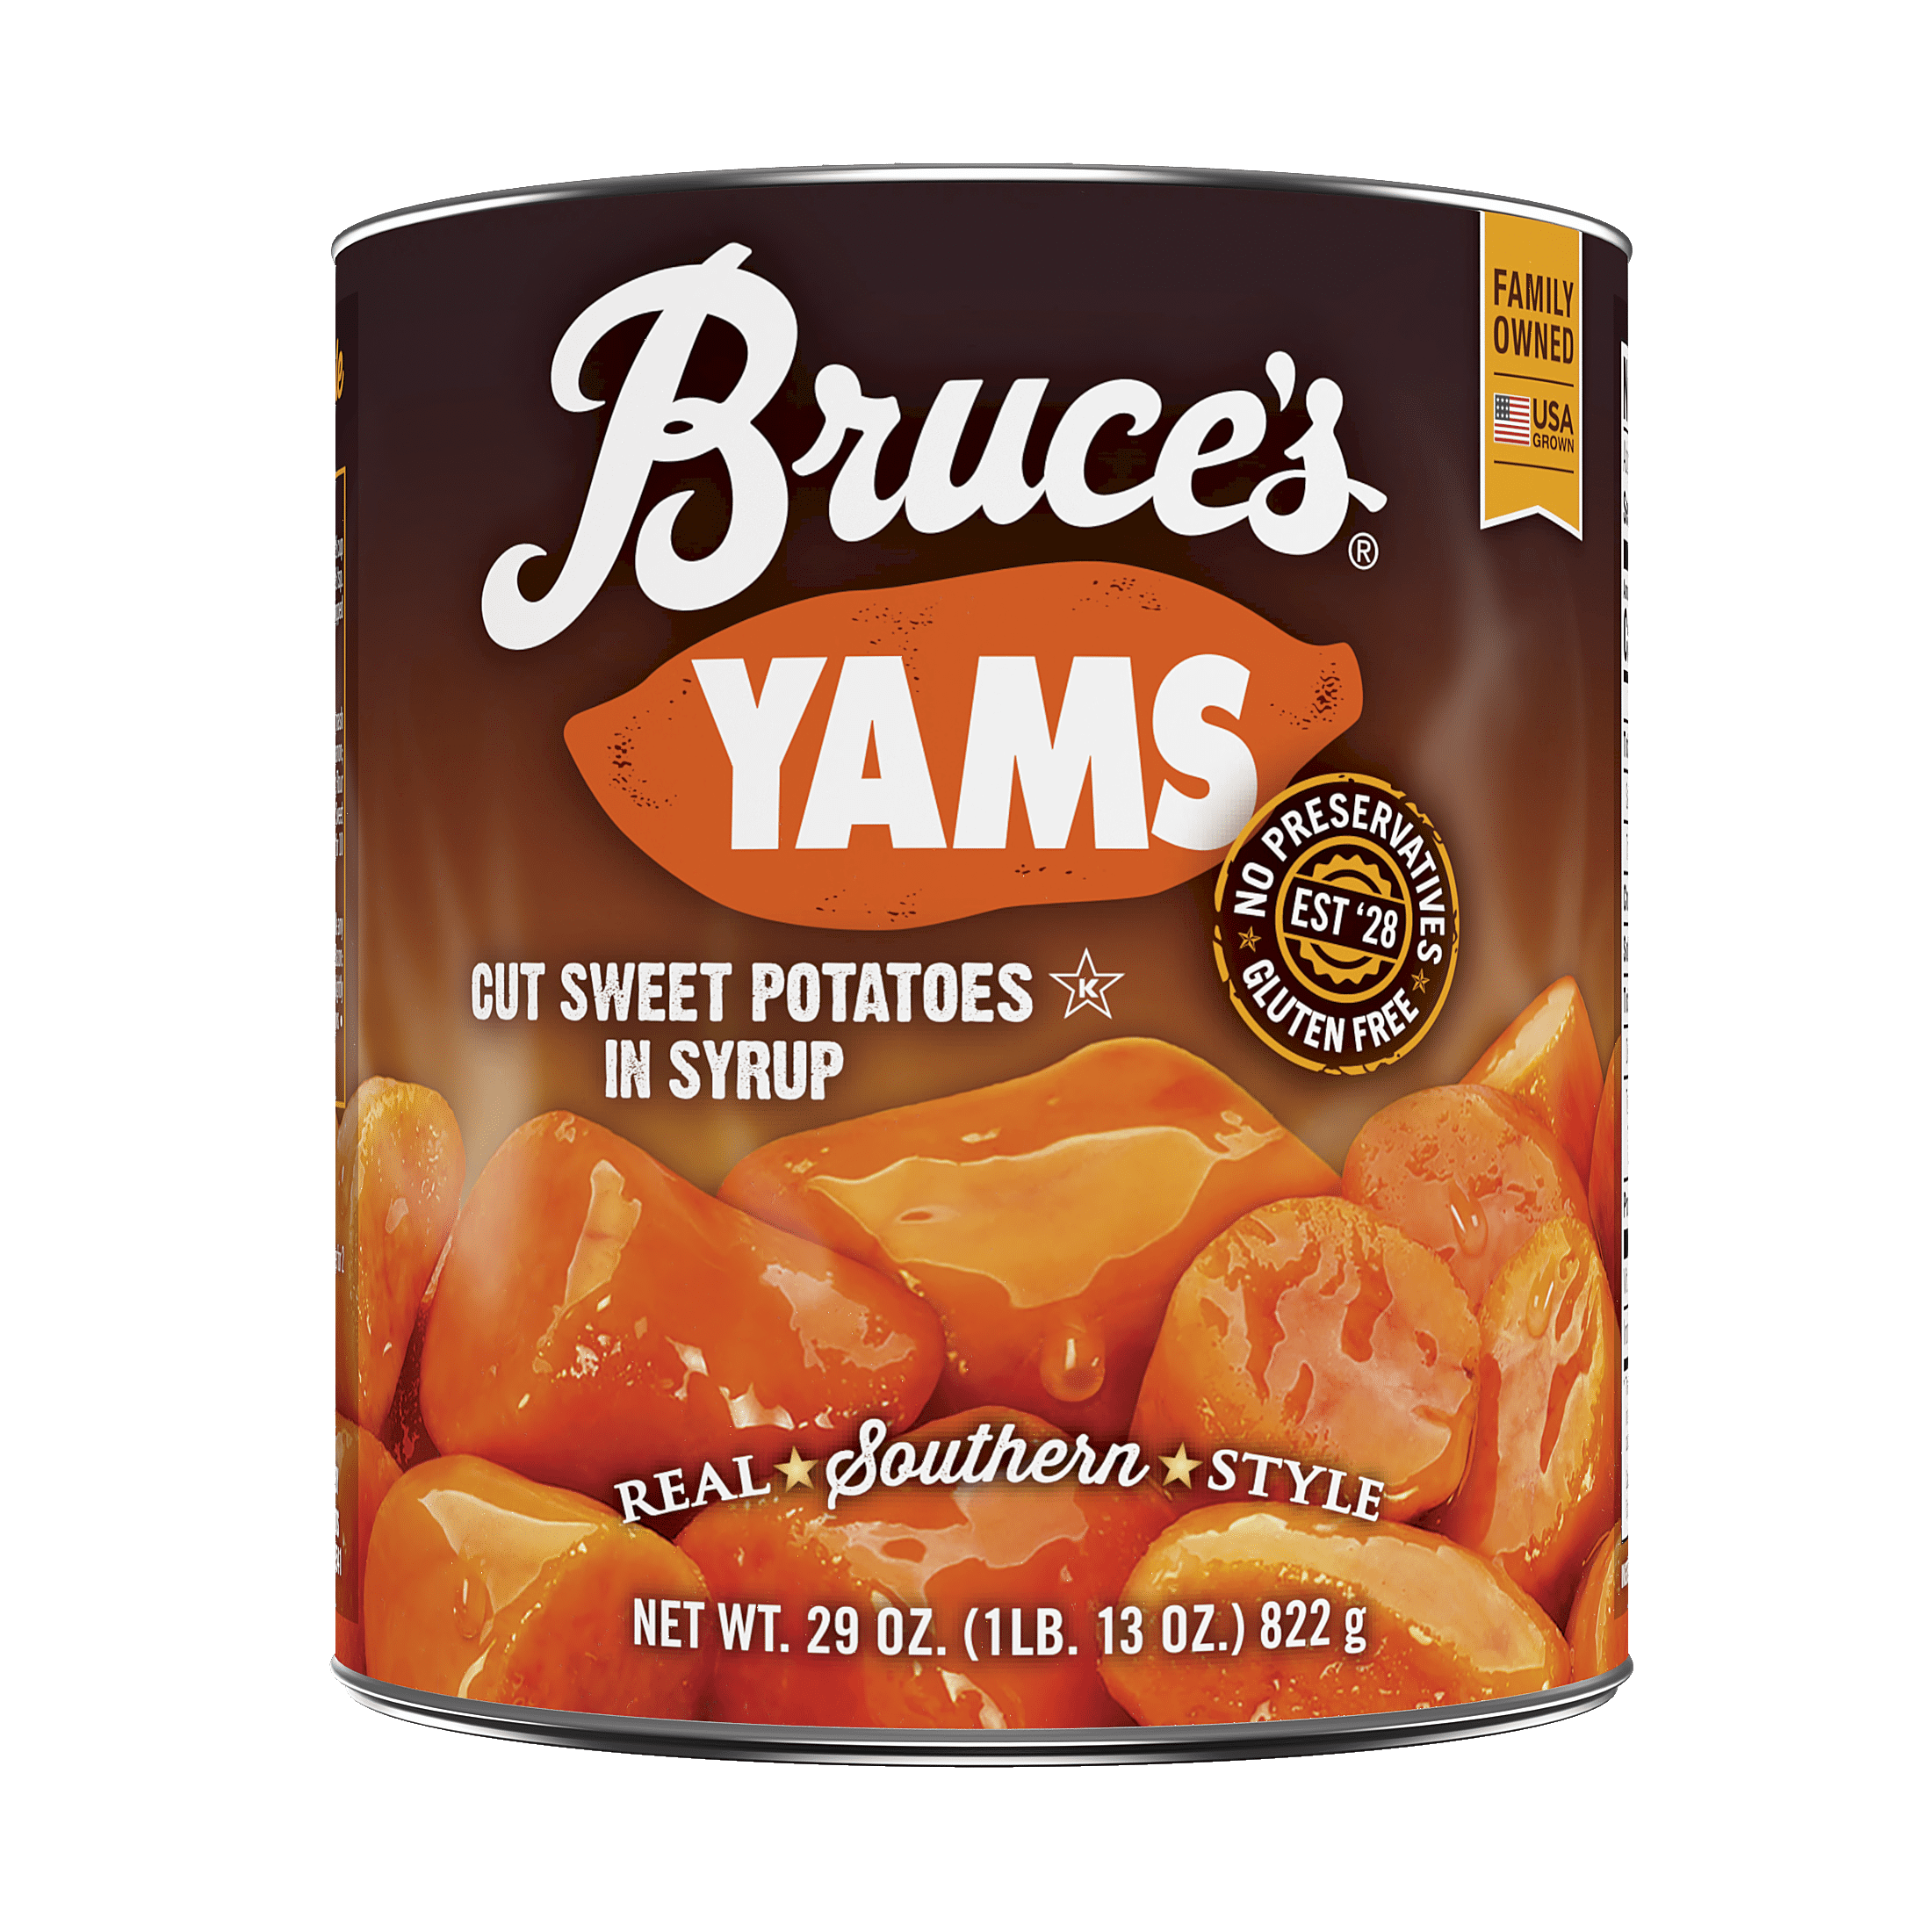 Bruce's Yams Cut Sweet Potatoes in Syrup, Canned Vegetables, 29 oz